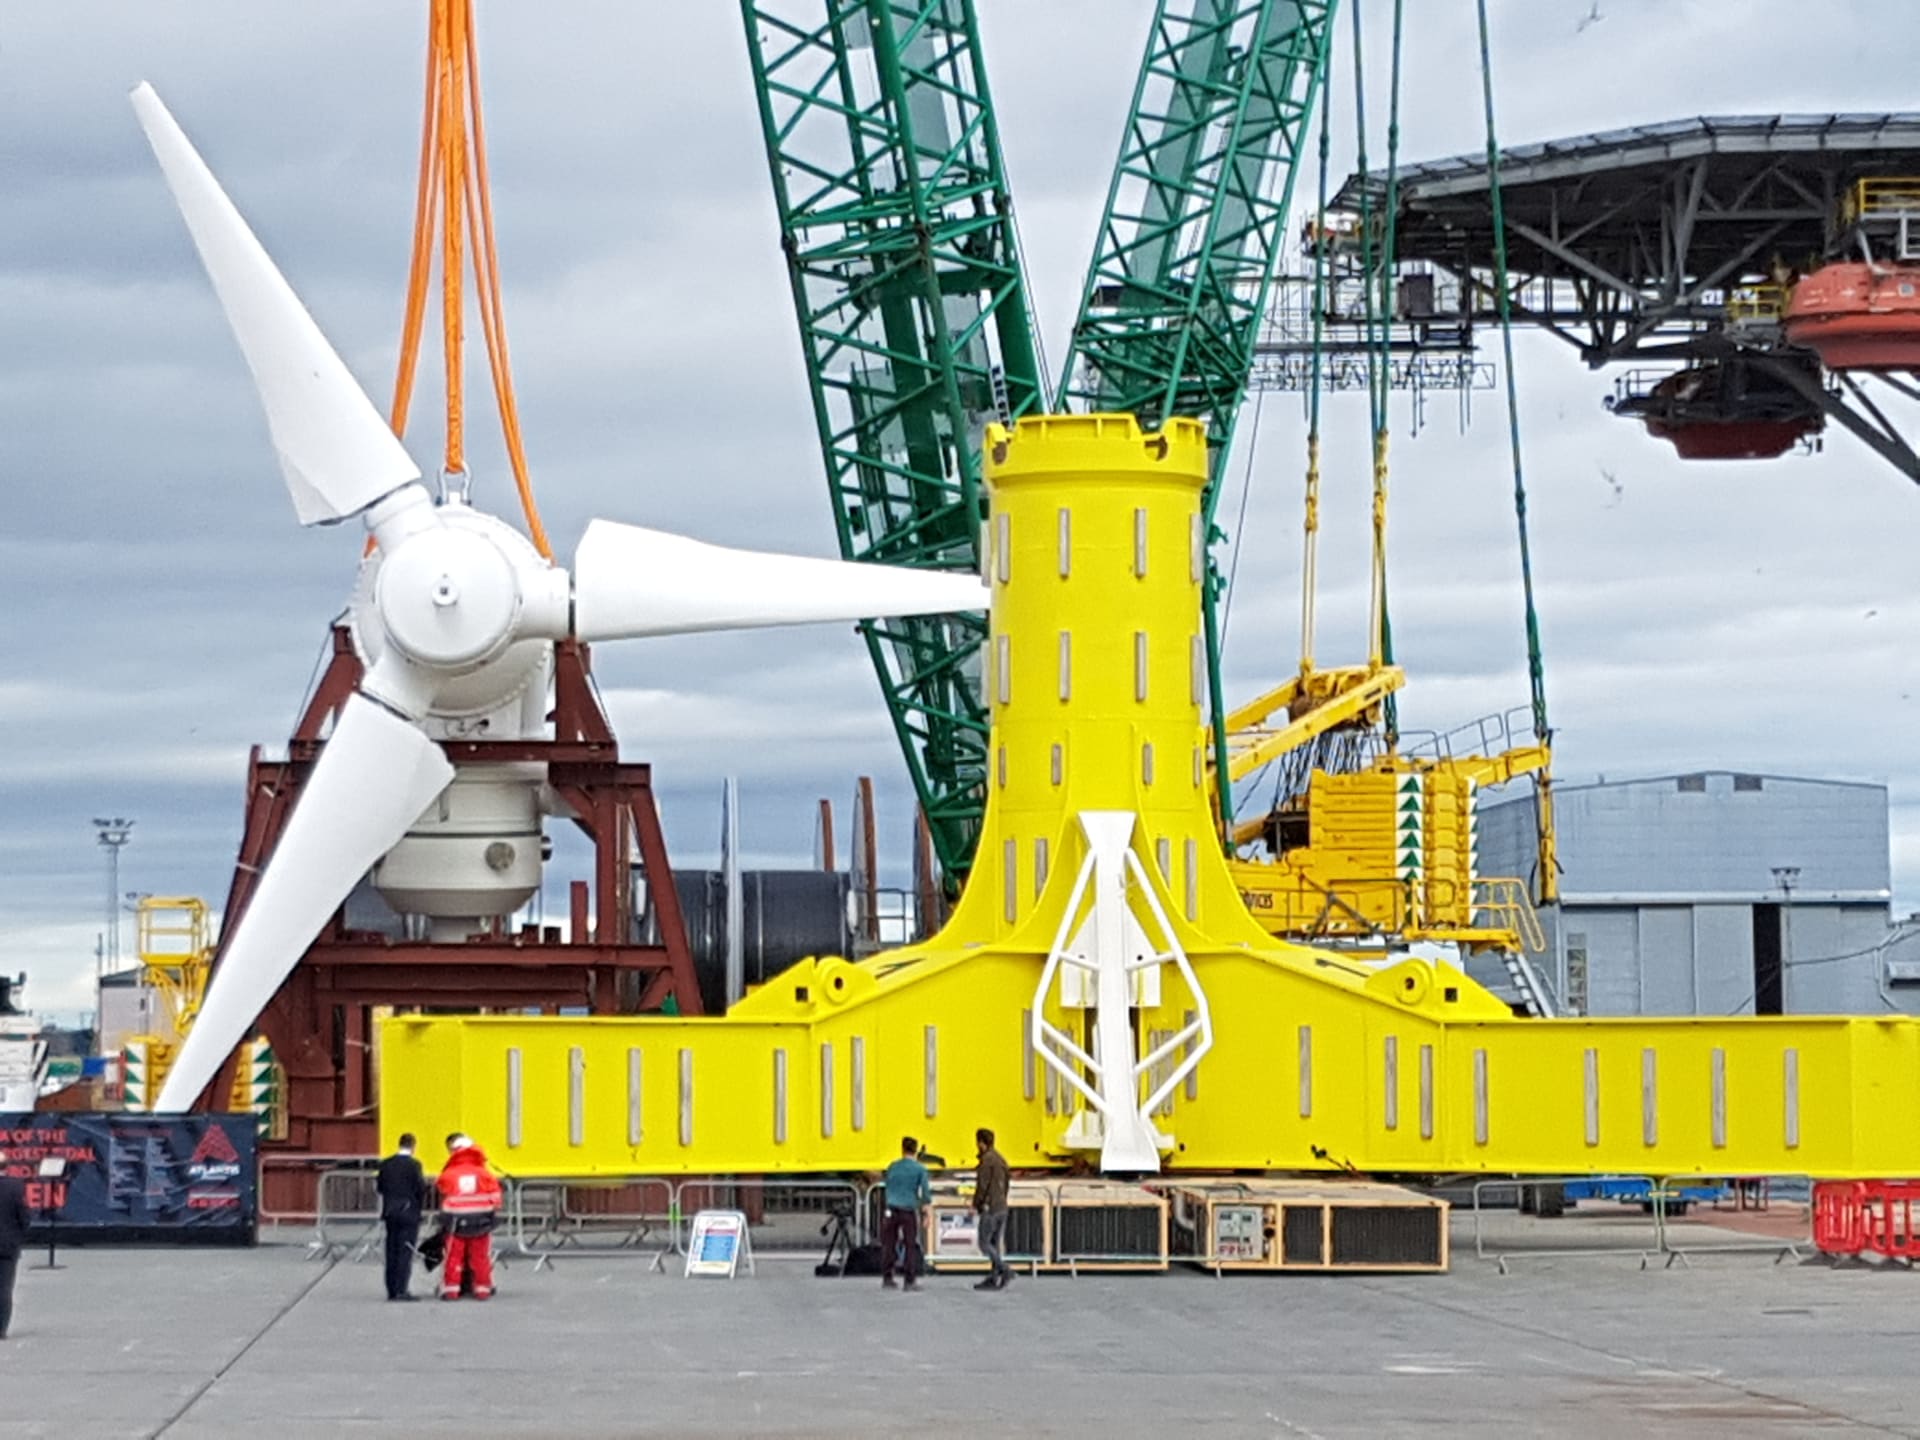 Engineering excellence allows structures to be built for extreme conditions, creating potential new energy sources (image: Meygen Phase 1A Tidal Turbine, Scotland - 2017 Structural Award winner)
Credit: Robert Bird Group